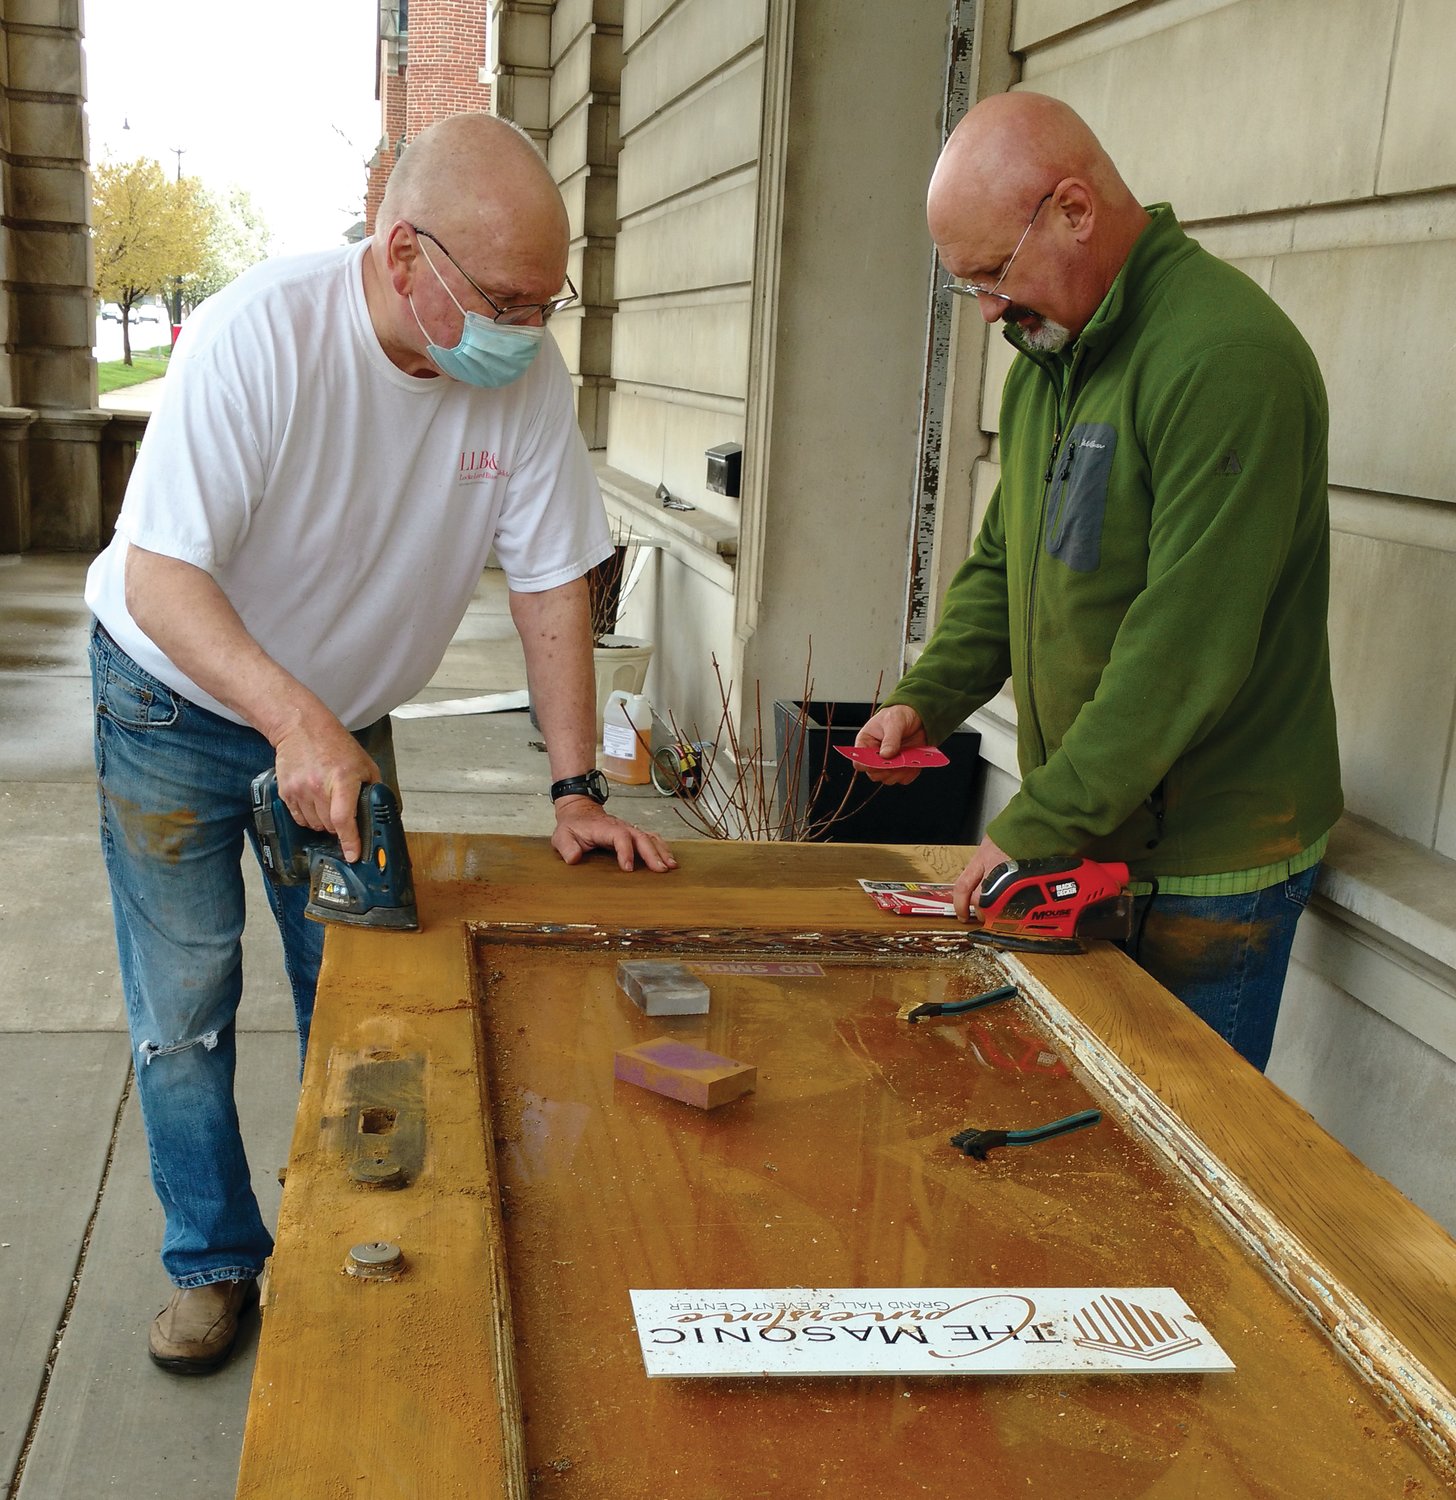 Crawfordsville Masonic Temple Foundation board members, Mike Reidy, left, and Scott Wheeler work on the entry doors of the Masonic Cornerstone Saturday. One side of one door was stripped of the existing deteriorating paint layers back to the original wood. The board is working on many projects to preserve the historic structure formerly known as the Masonic Temple. For more information on how to donate, visit www.themasoniccornerstone.com or call 765-366-2880.